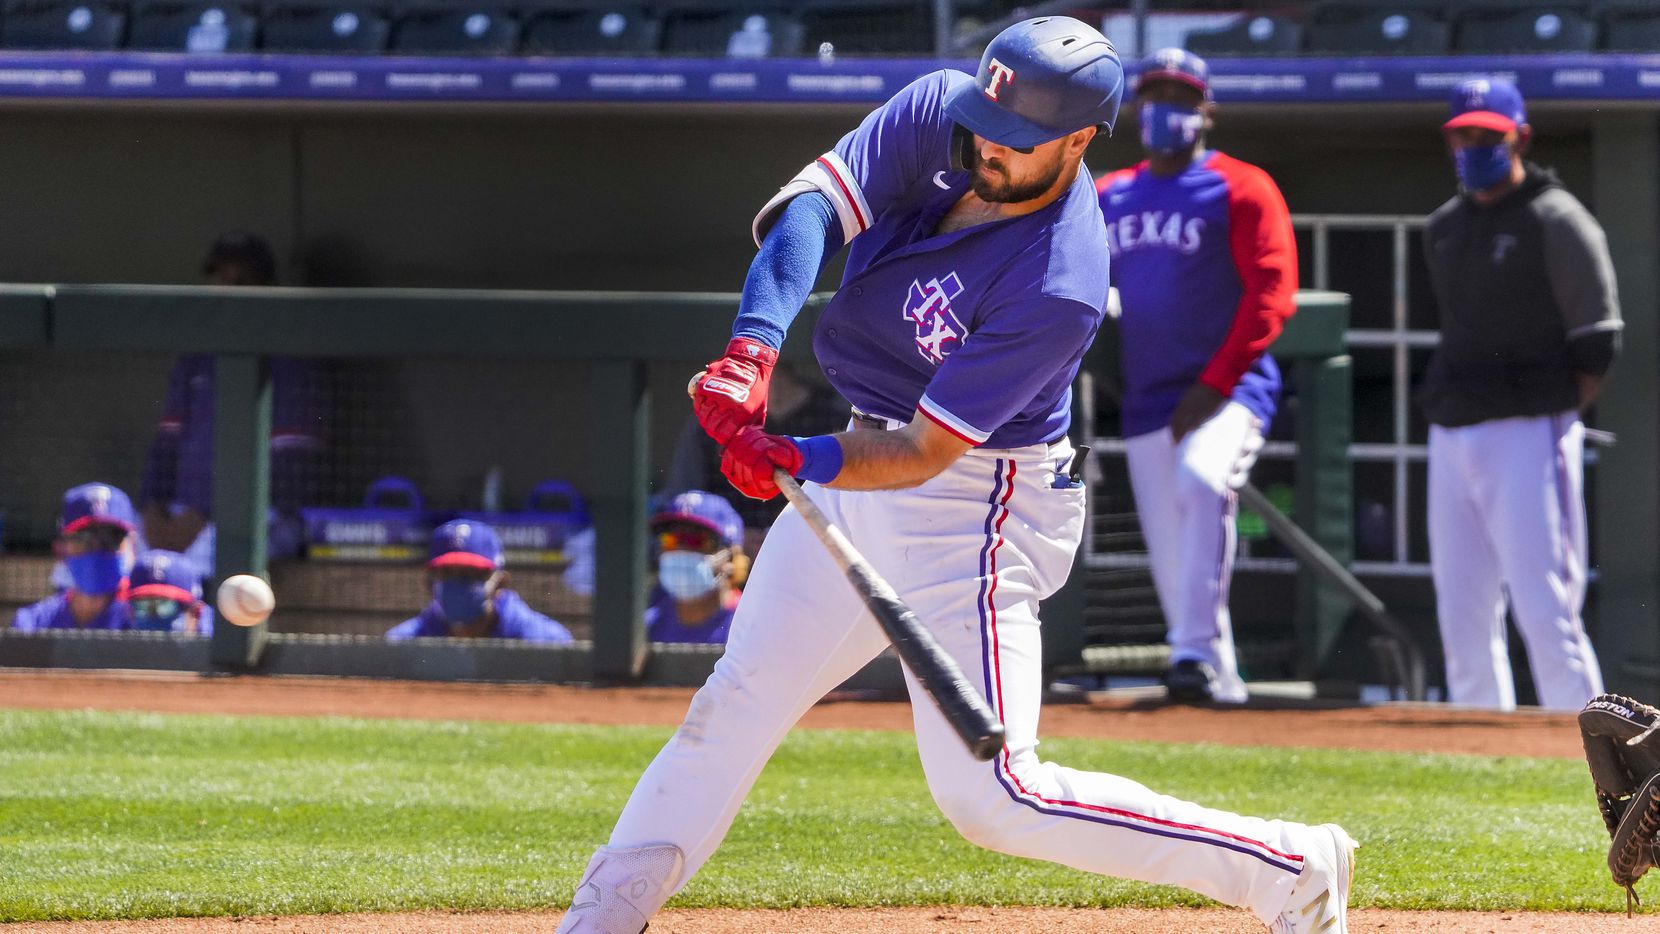 Texas Rangers outfielder Joey Gallo hits a solo home run during the first inning of a spring training game against the Cleveland Indians at Surprise Stadium on Tuesday, March 9, 2021, in Surprise, Ariz.